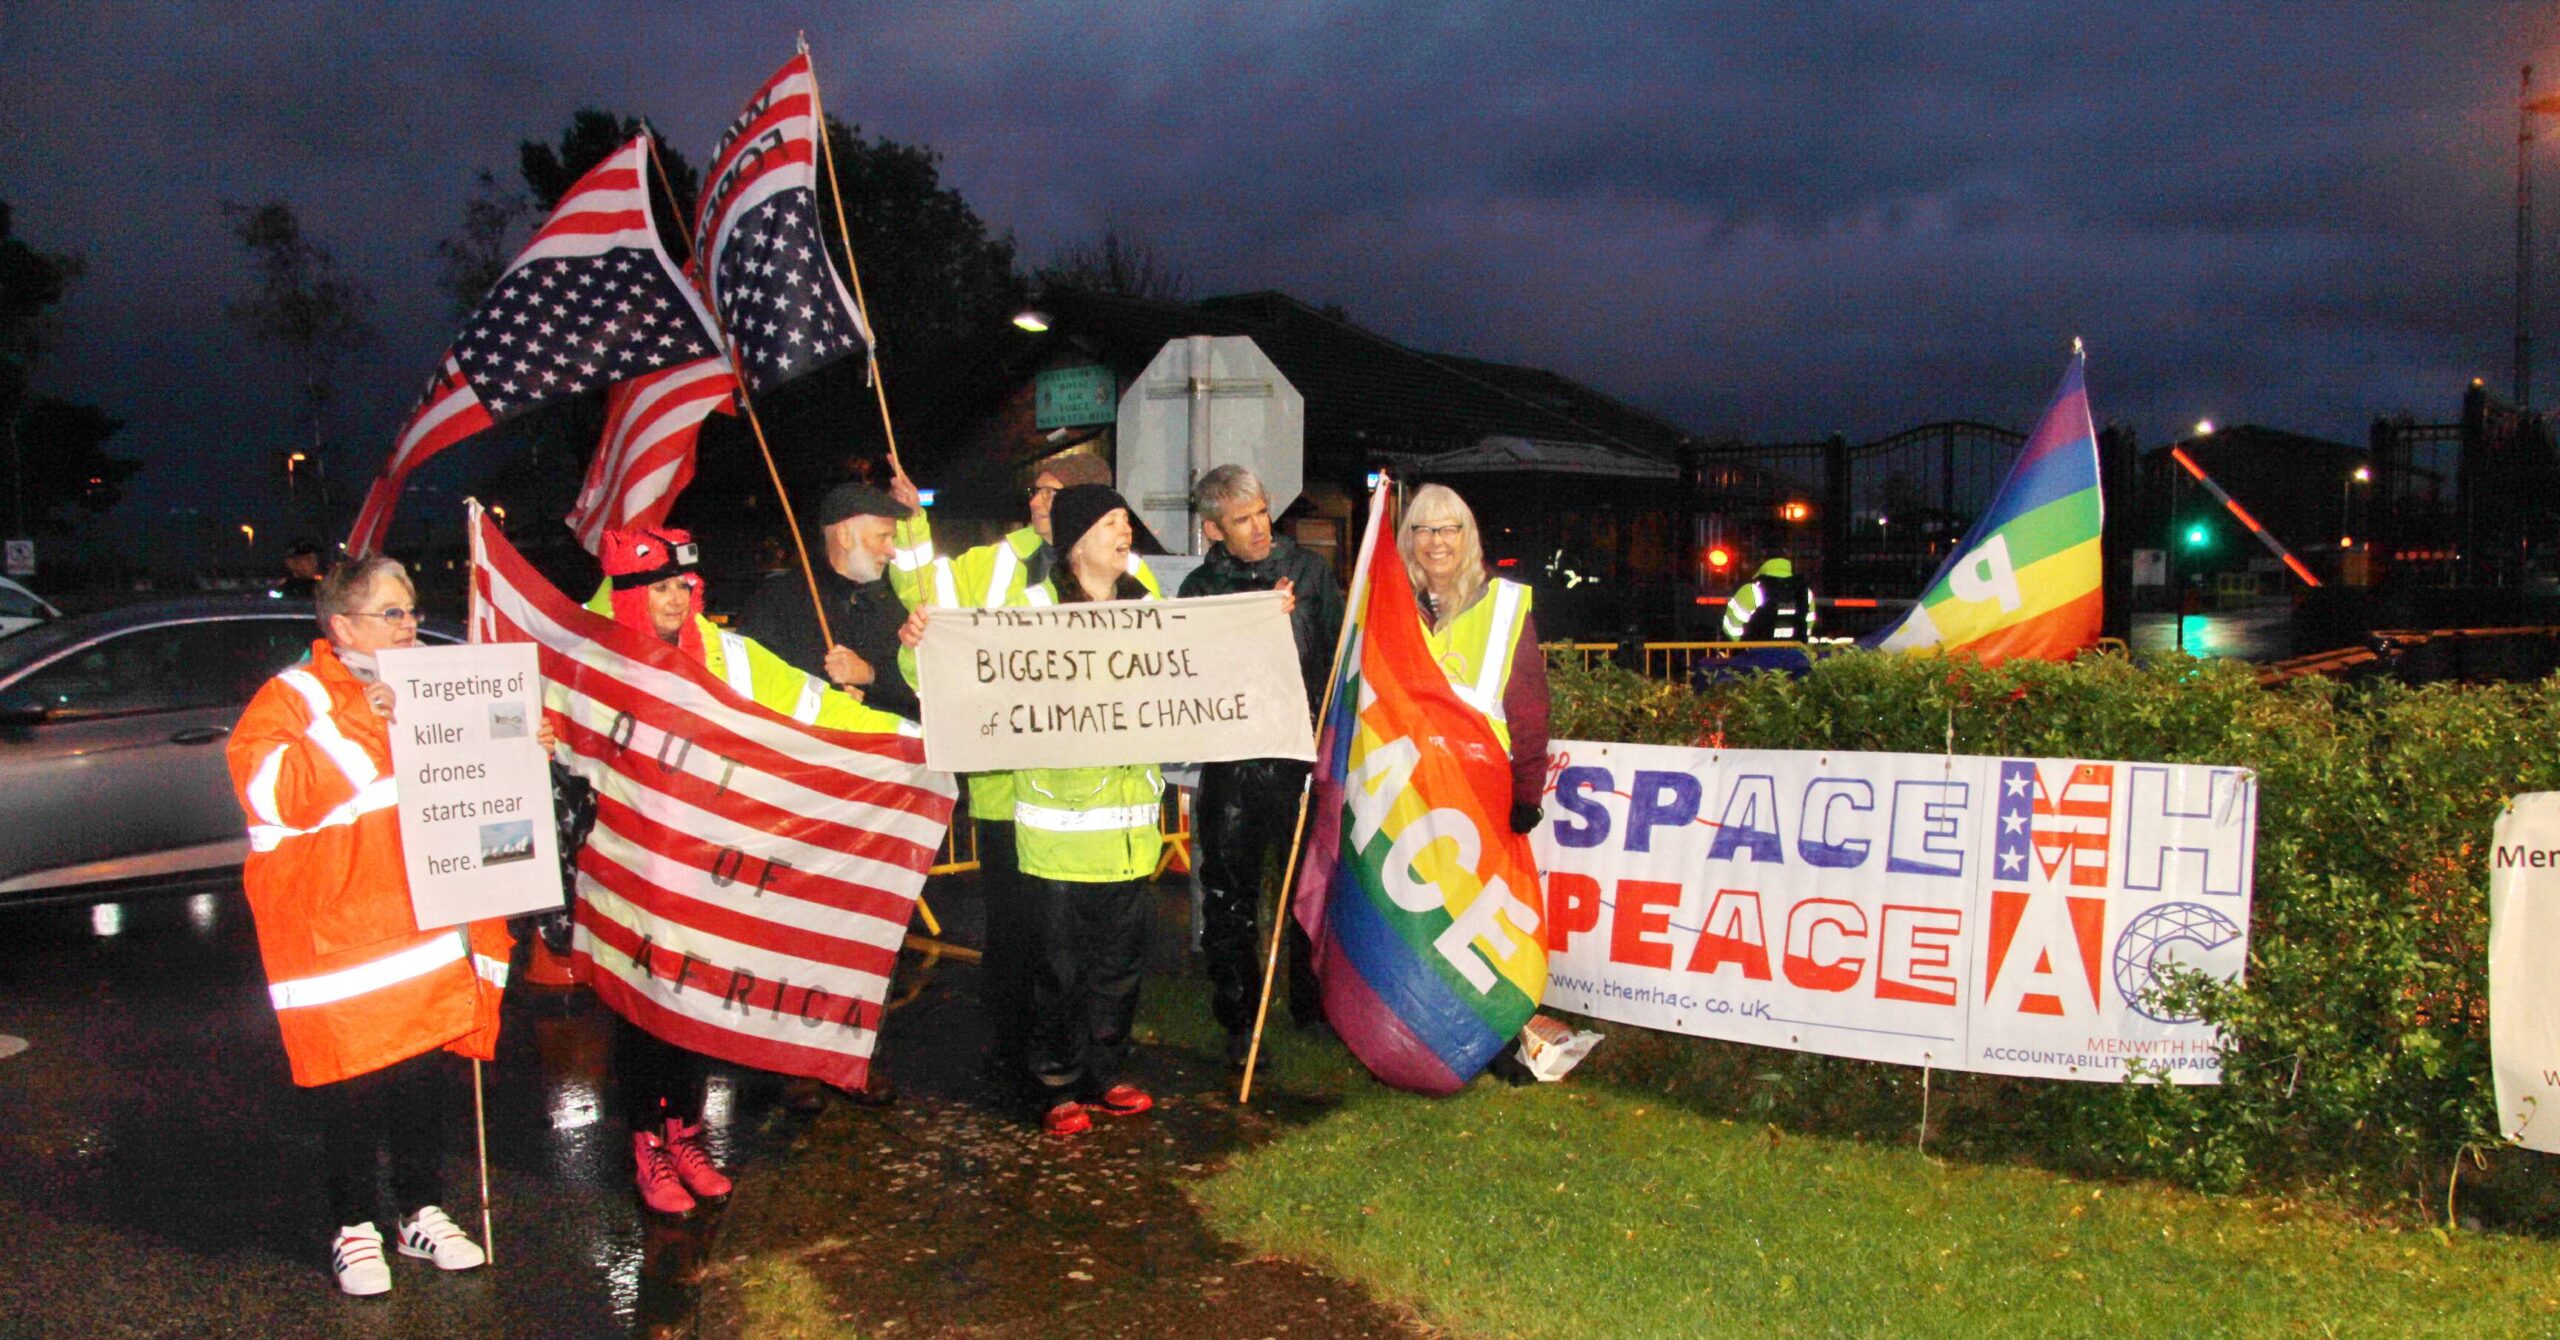 A demonstration will take place at Menwith Hill as part of Keep Space for Peace